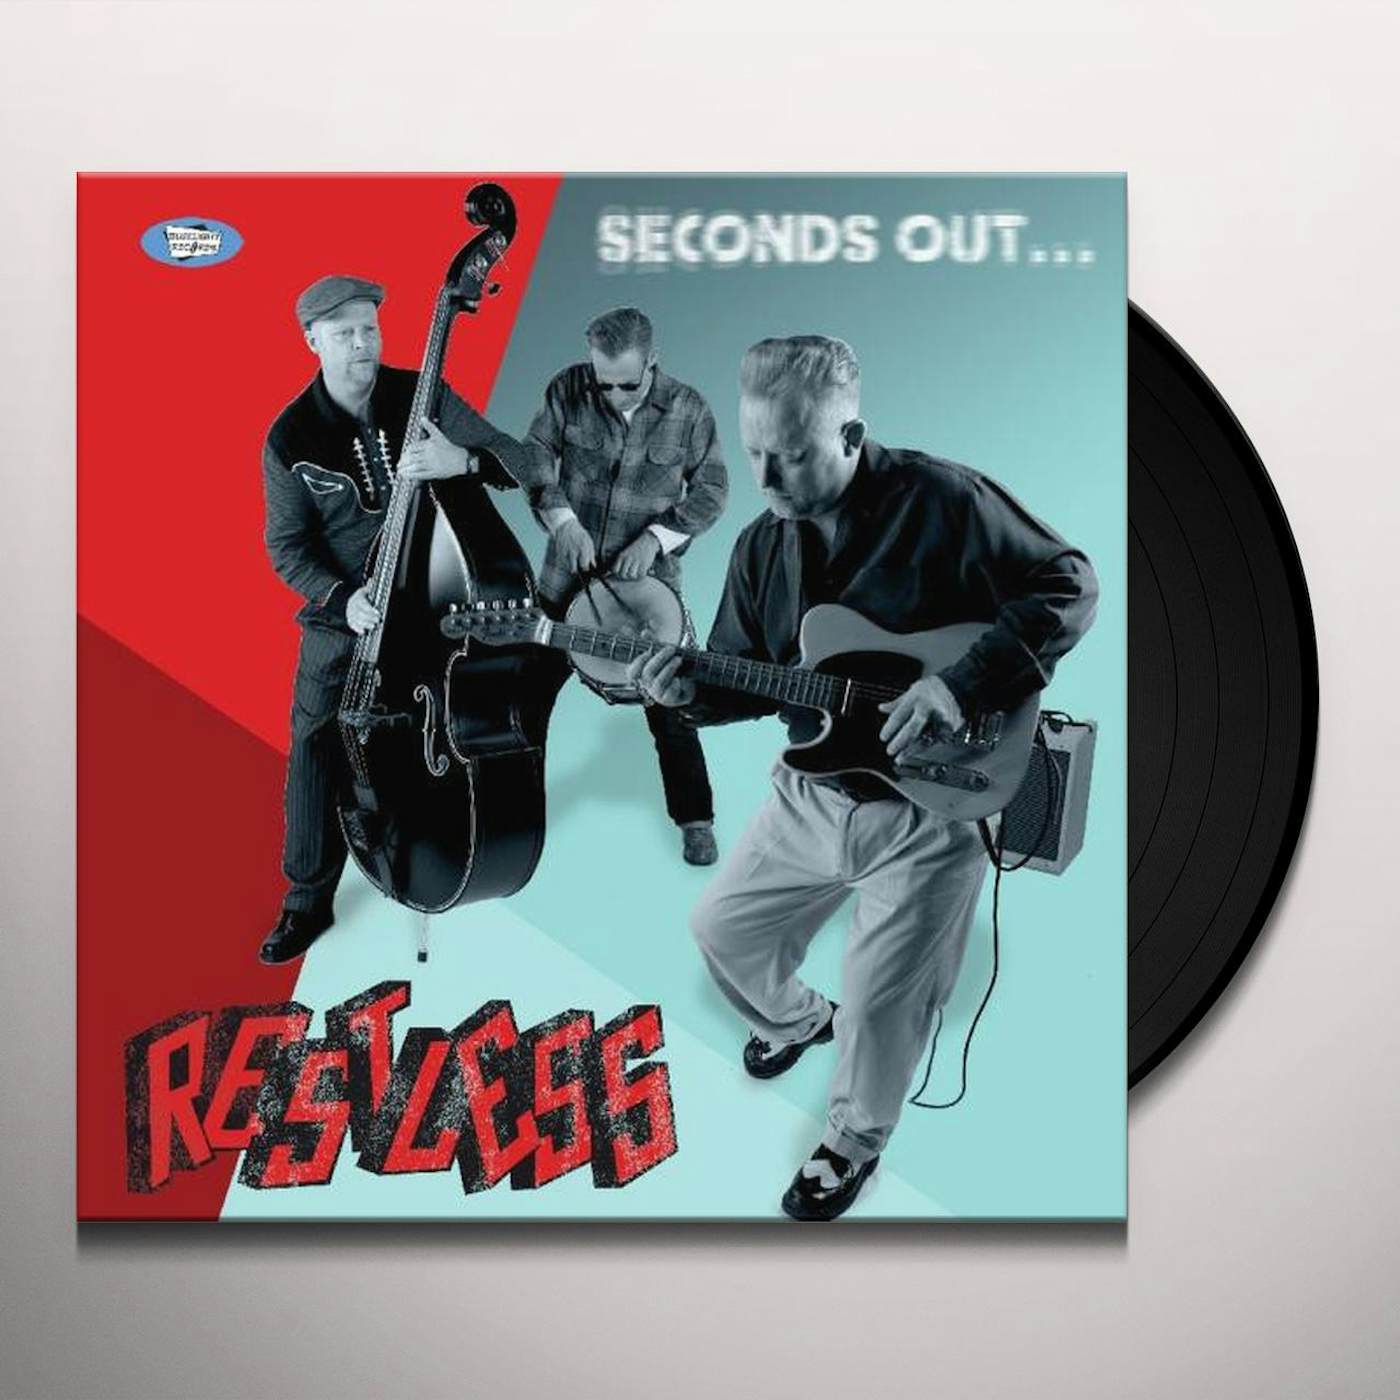 Restless Seconds Out Vinyl Record